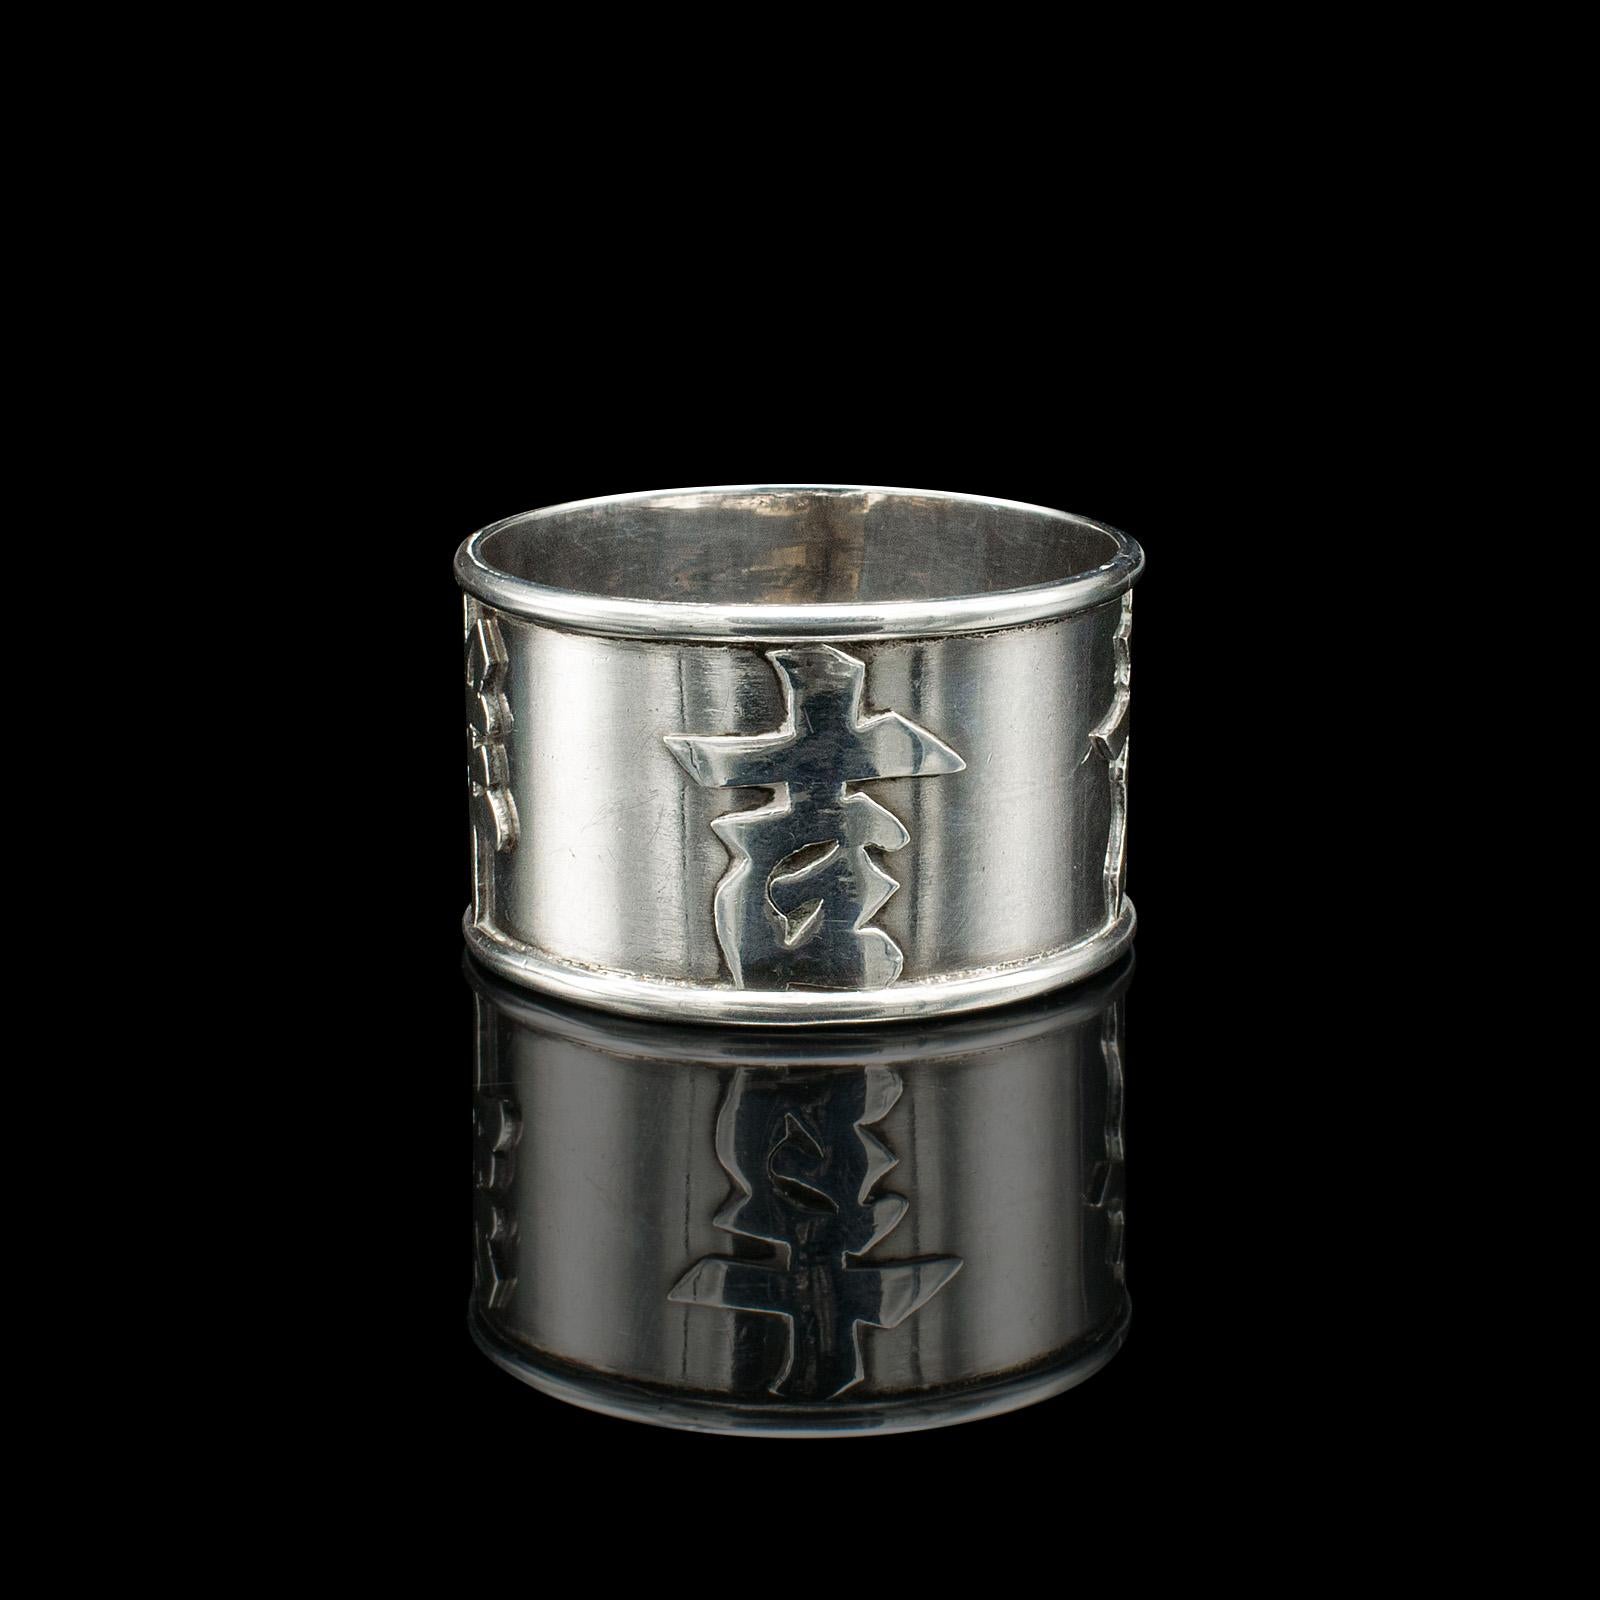 This is an antique personalised napkin ring. A Chinese, silver decorative holder, dating to the late Victorian period, circa 1900.

Fascinating relief finish with personalised appeal
Displays a desirable aged patina and in good order
Silver presents